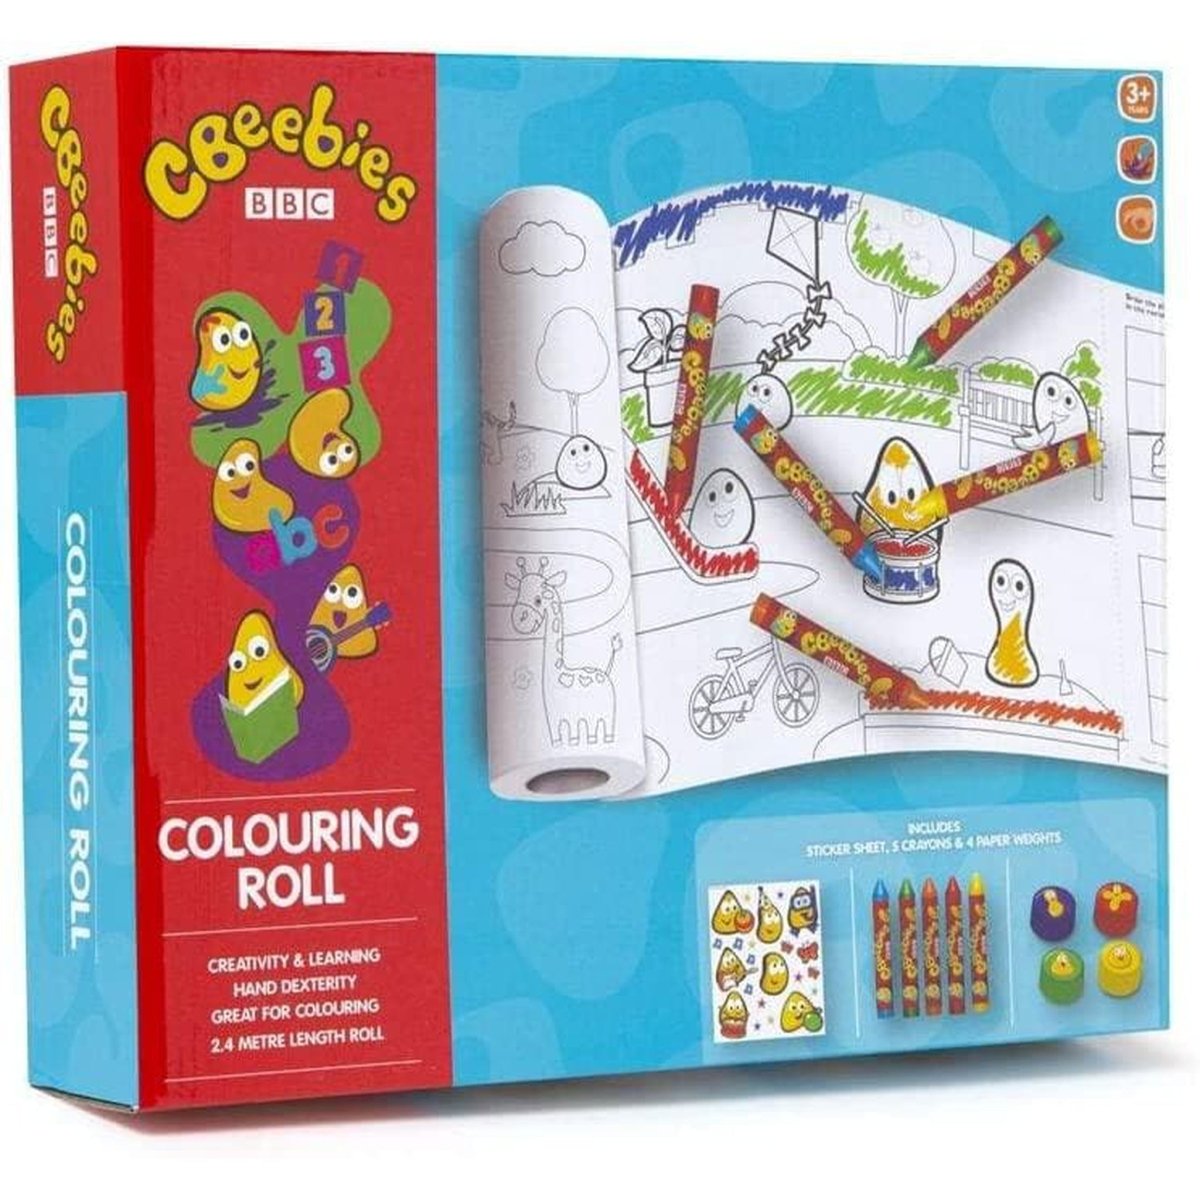 Cbeebies 2.4m Colouring Roll Set - Kids Party Craft